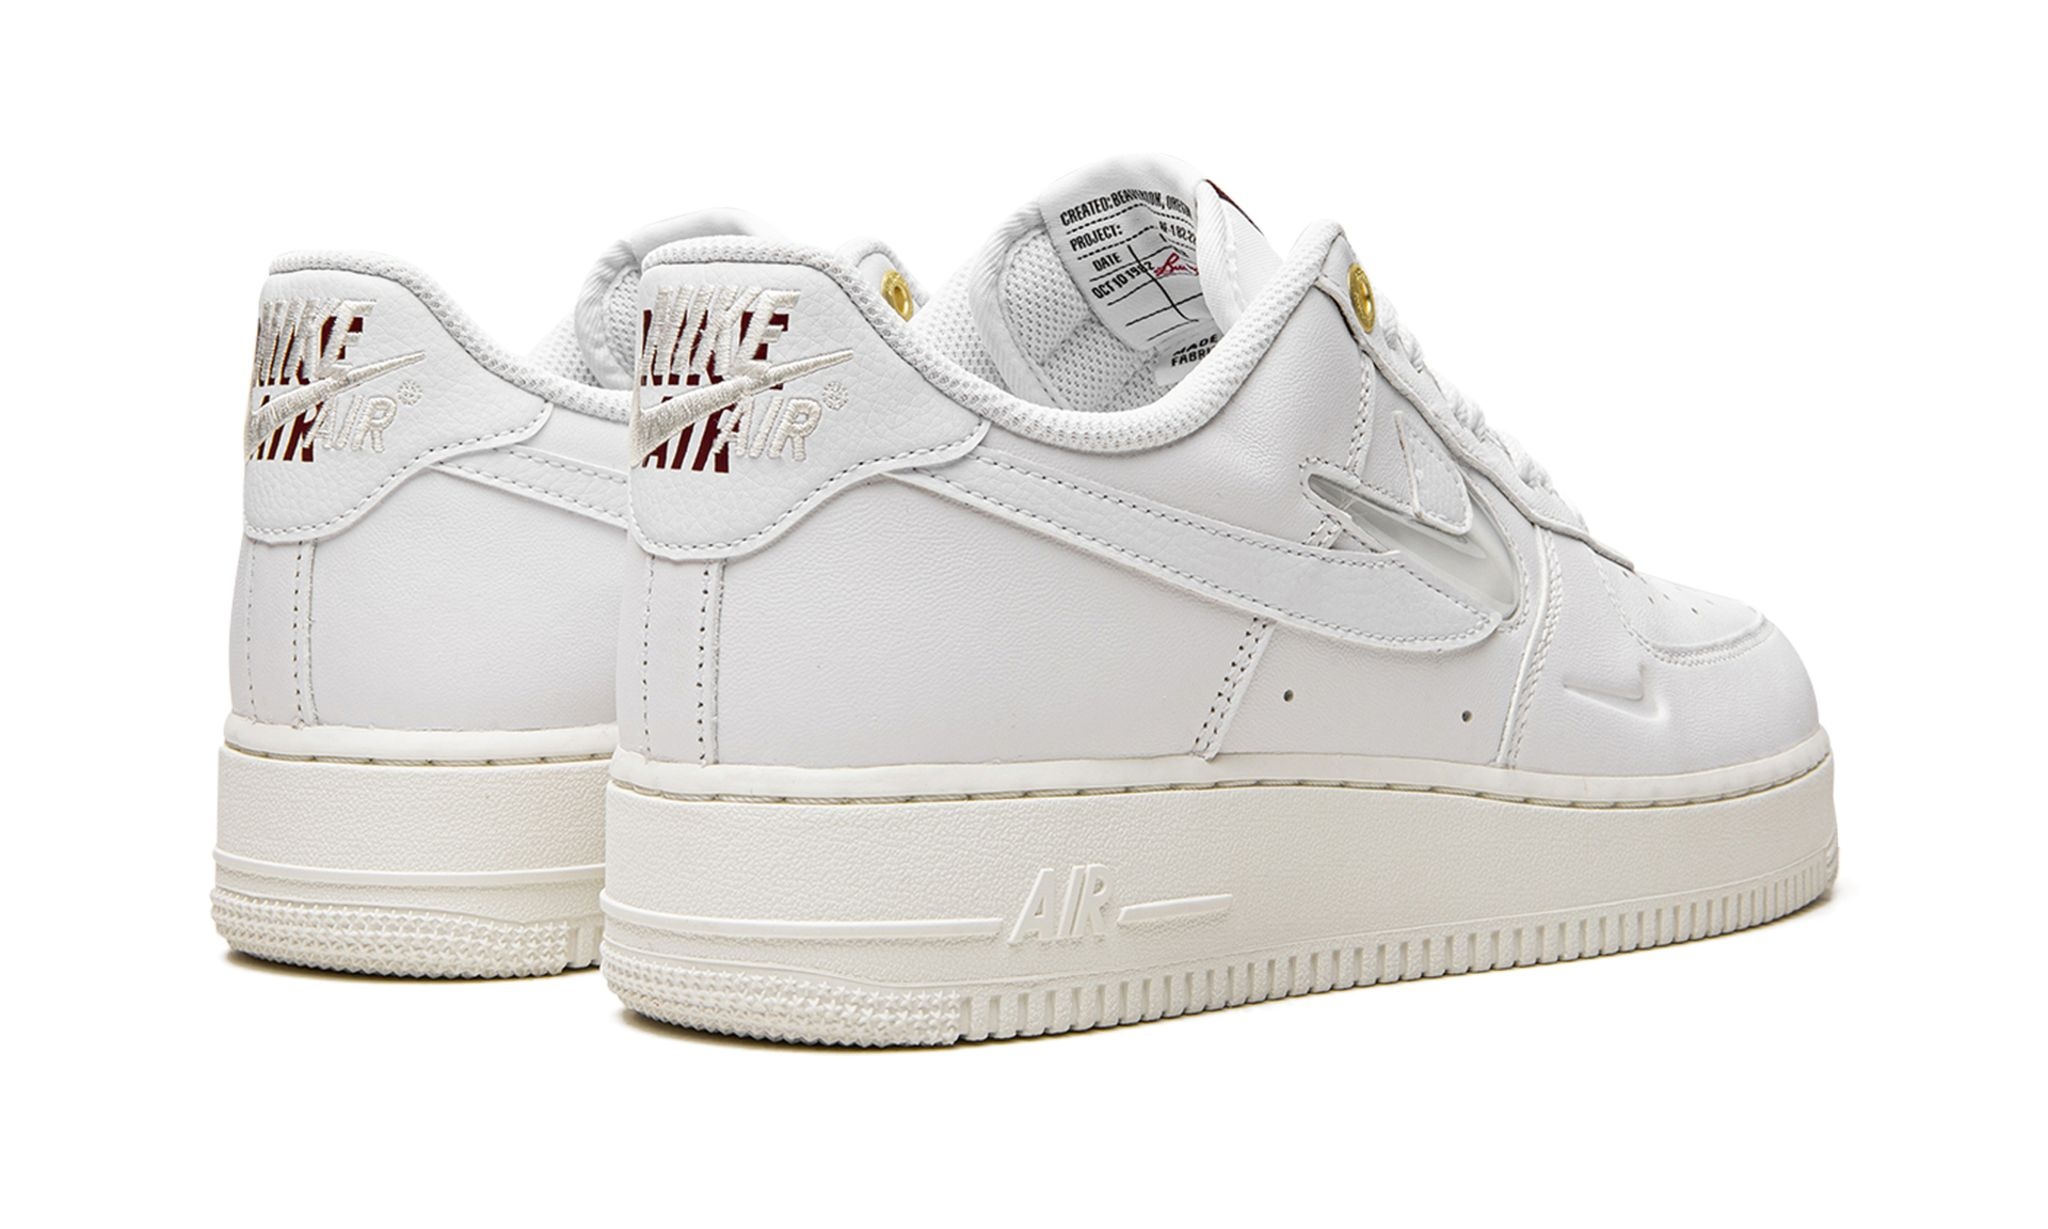 Air Force 1 Low '07 LV8 "Join Forces Sail" - 3